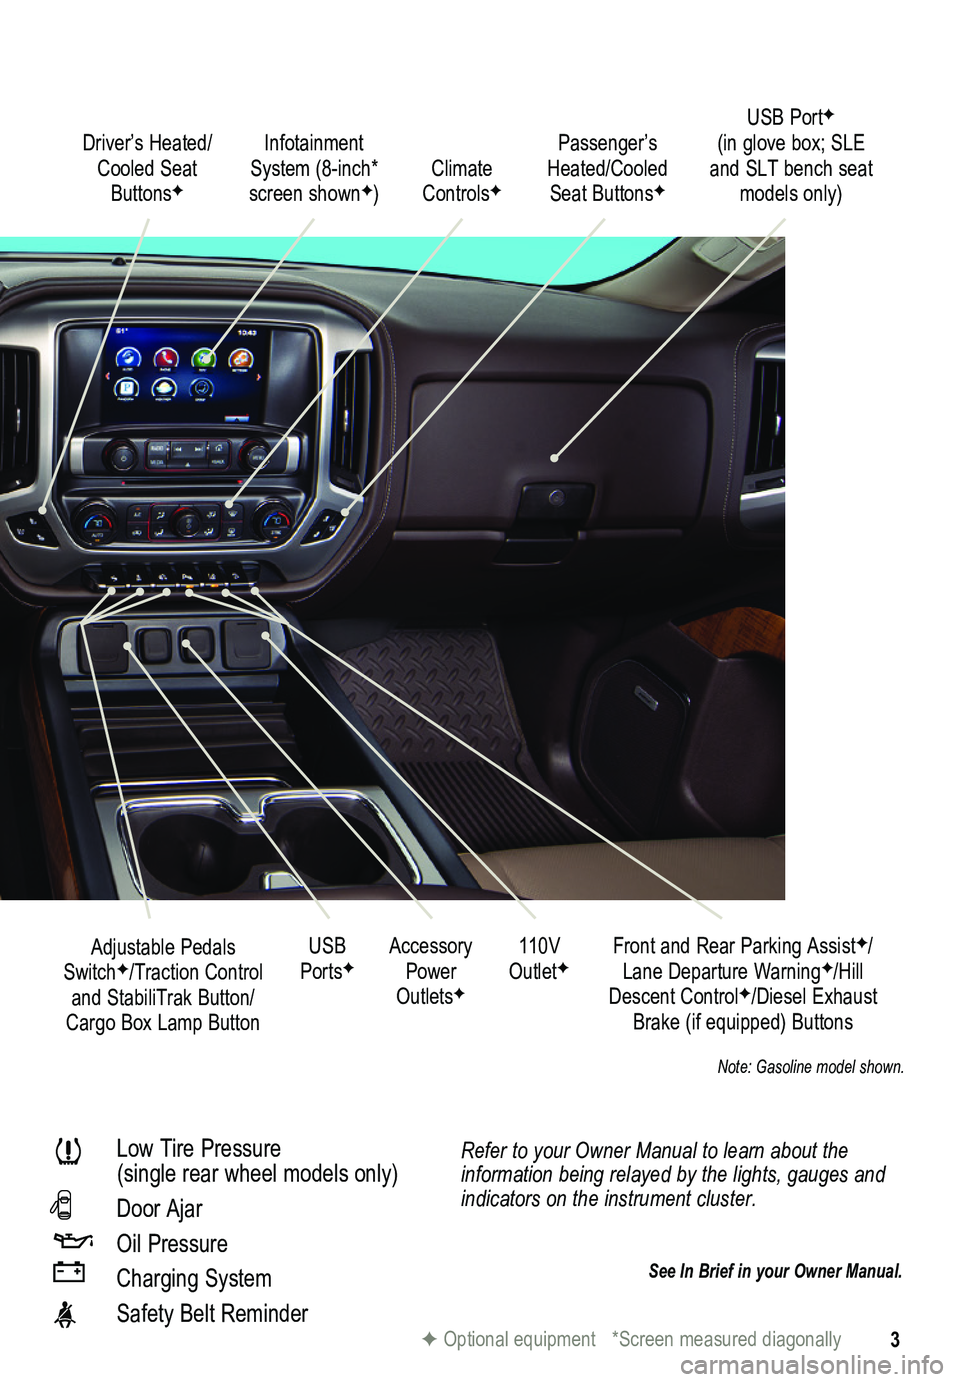 GMC SIERRA 2015  Get To Know Guide 3
Refer to your Owner Manual to learn about the information being relayed by the lights, gauges and indicators on the instrument cluster.
See In Brief in your Owner Manual.
Driver’s Heated/Cooled Se